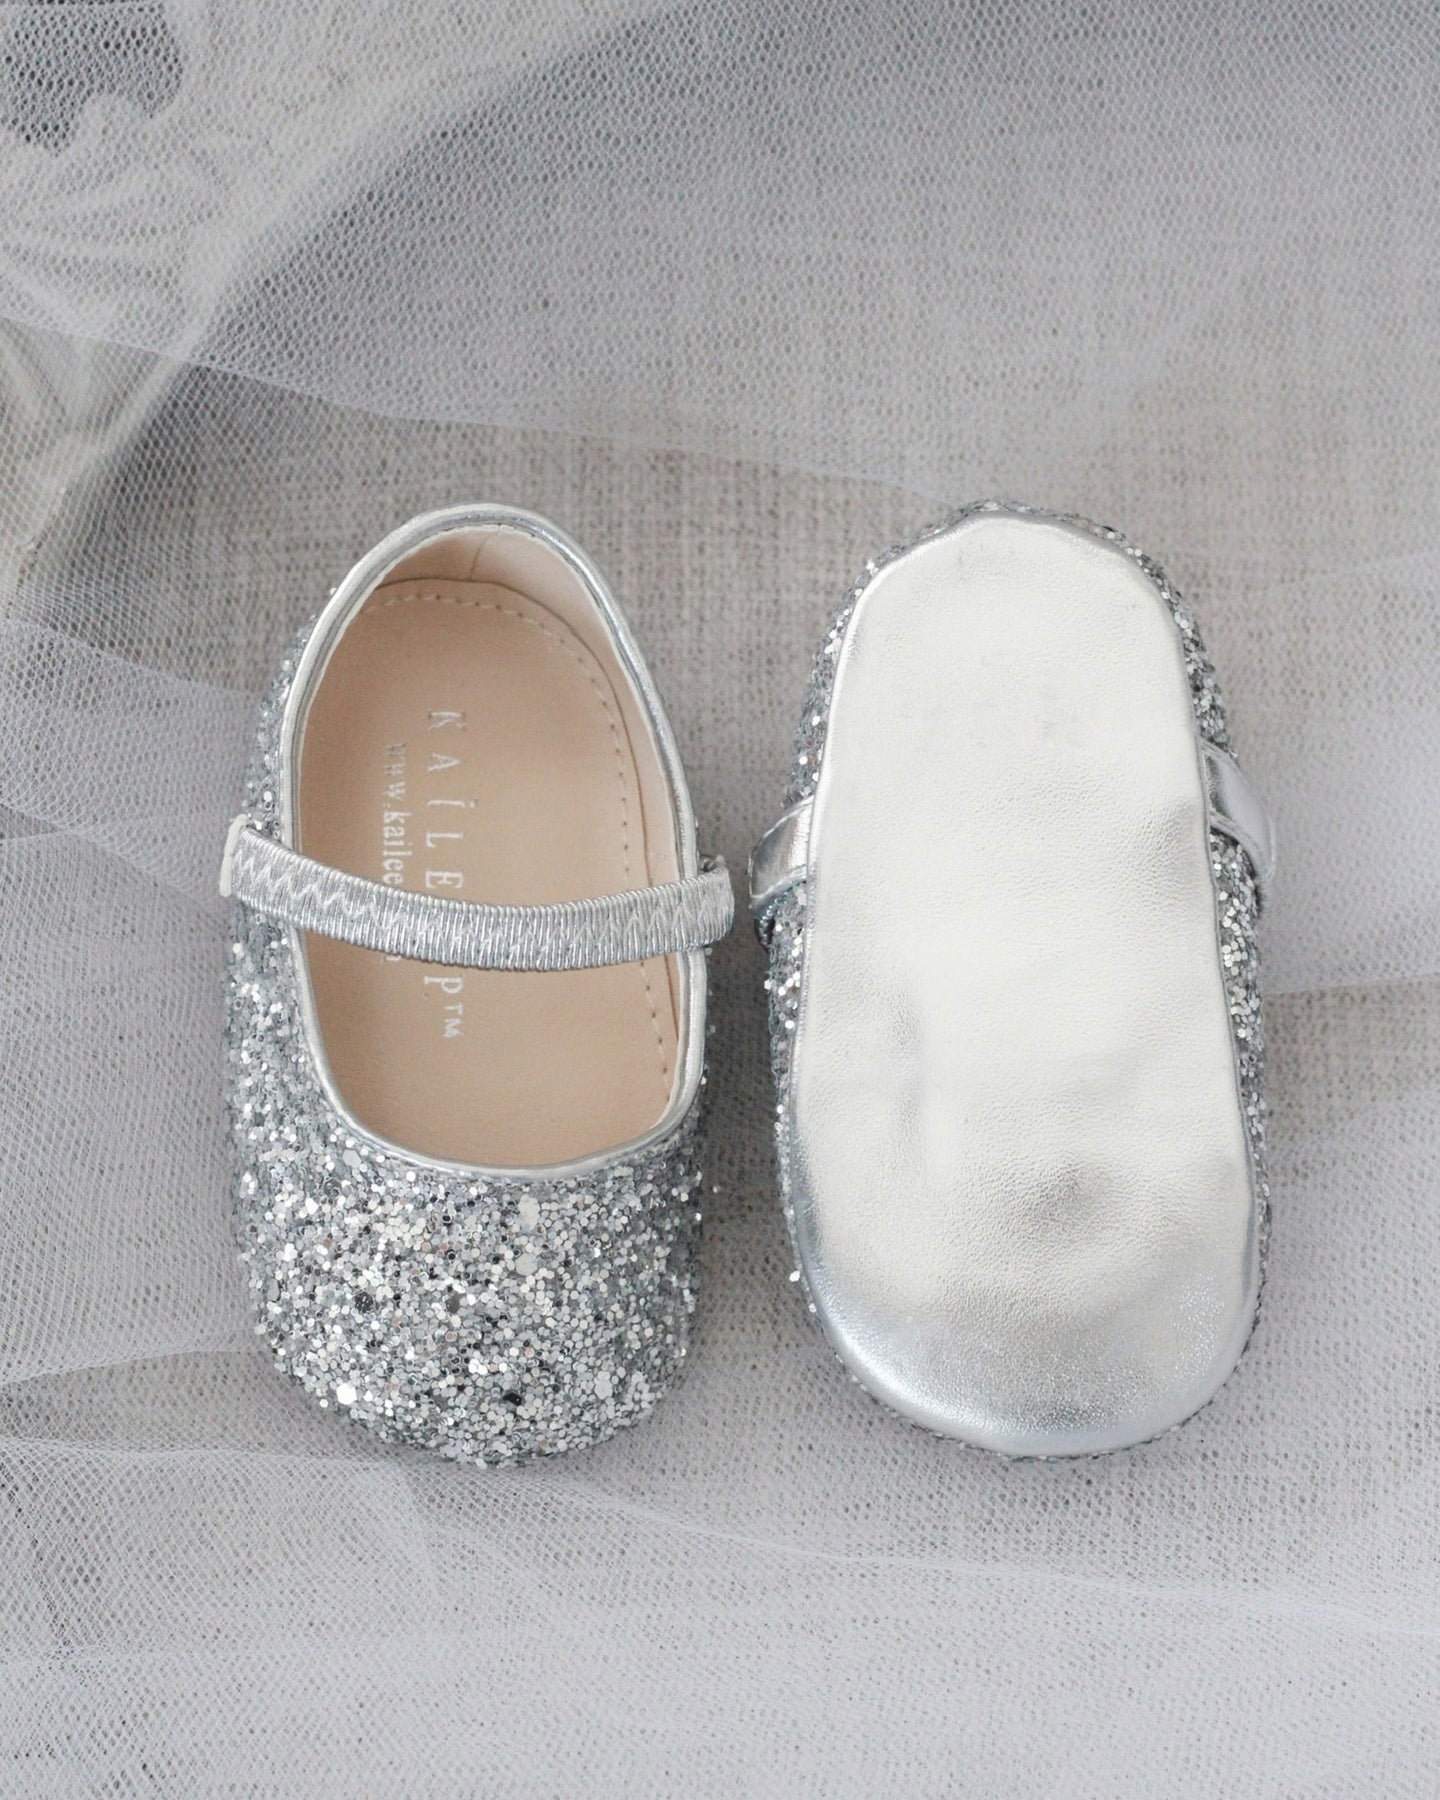 Baby Shoes, Flower Girls Shoes, Birthday Shoes, Glitter Shoes – Kailee ...